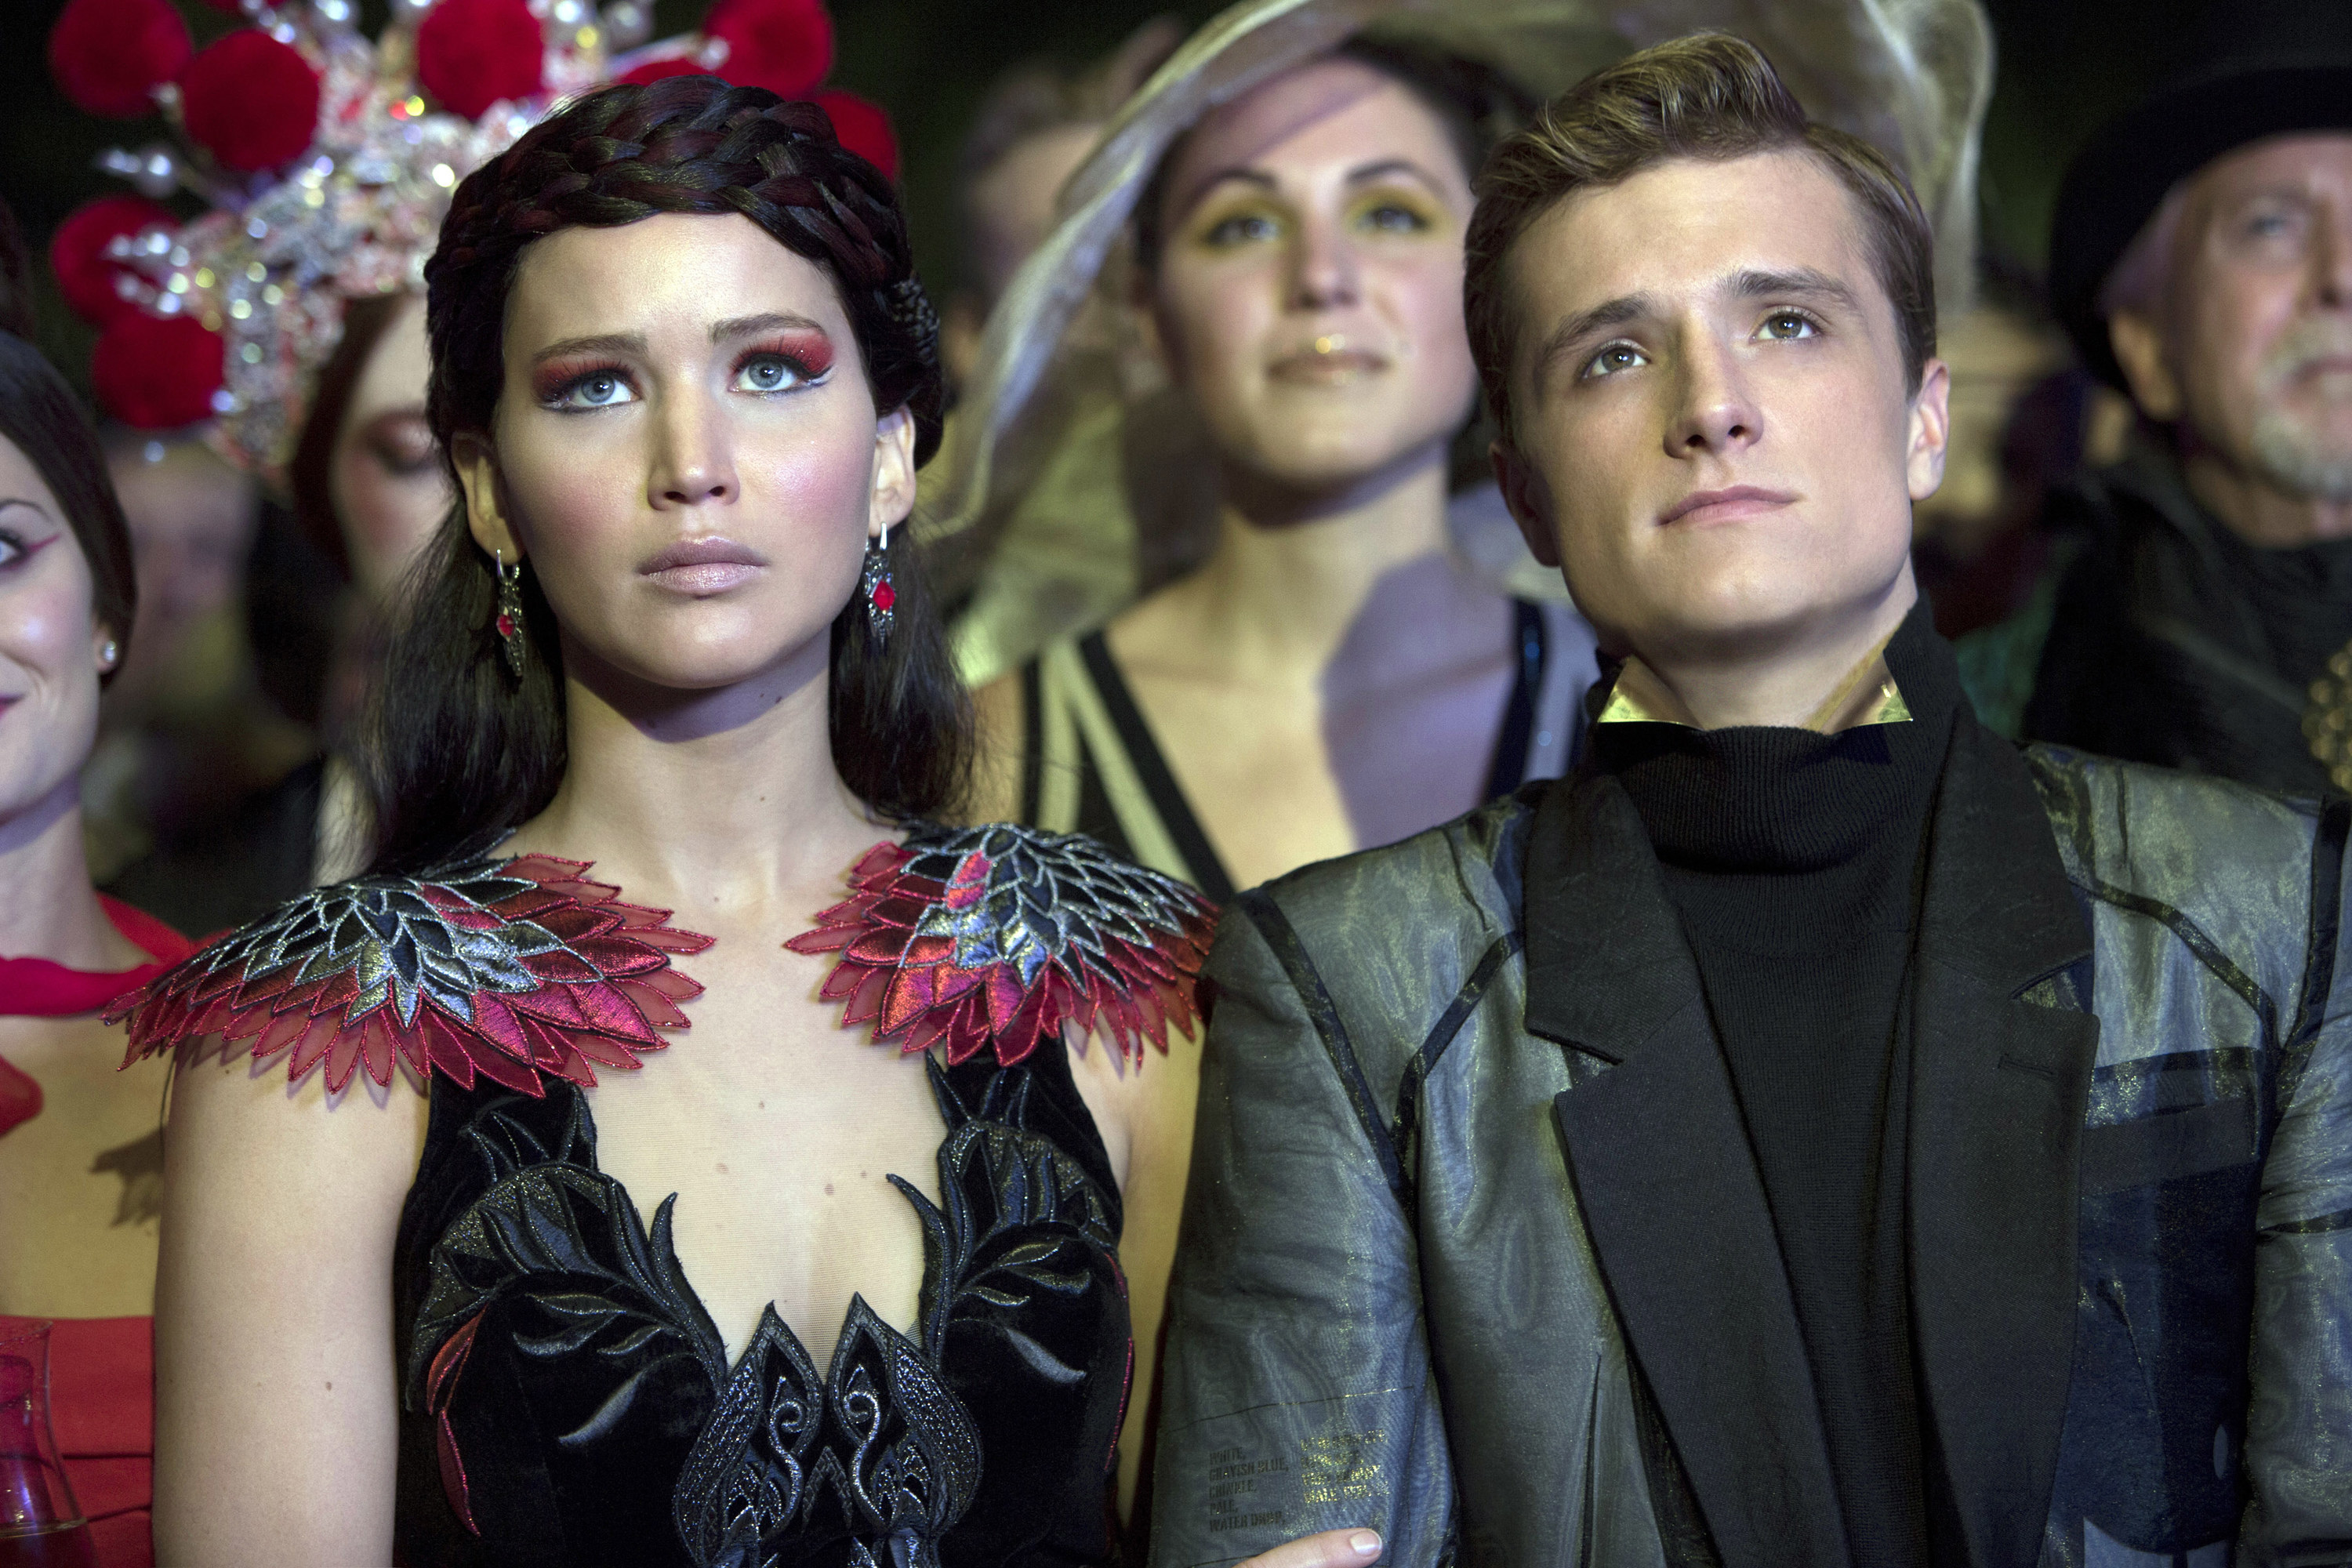 katniss and peeta sitting in a crowd together